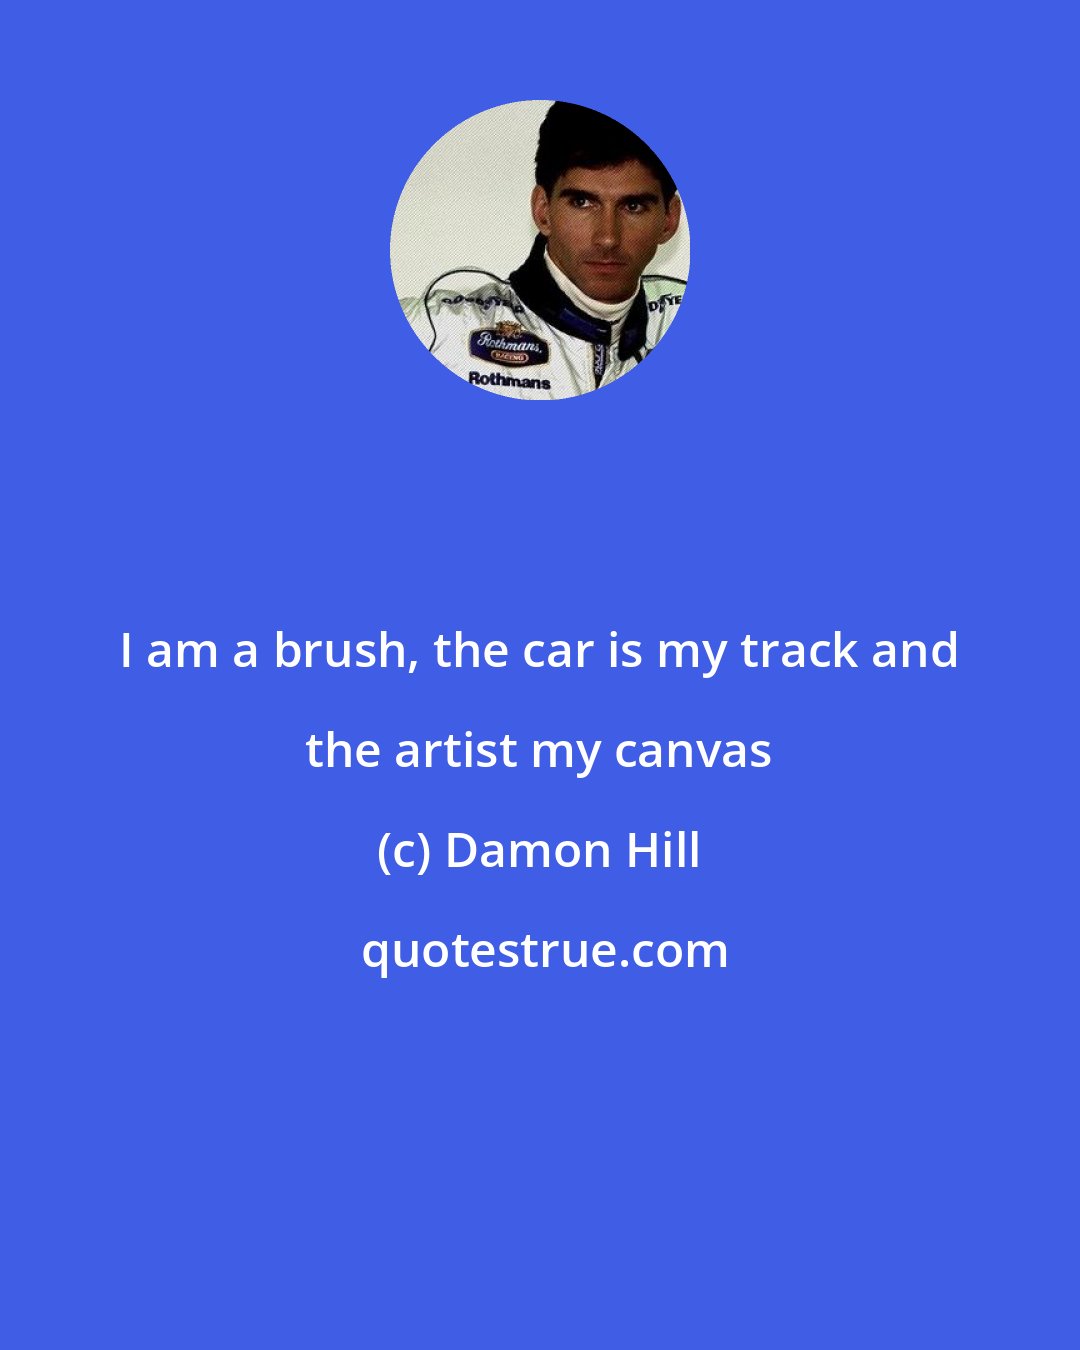 Damon Hill: I am a brush, the car is my track and the artist my canvas